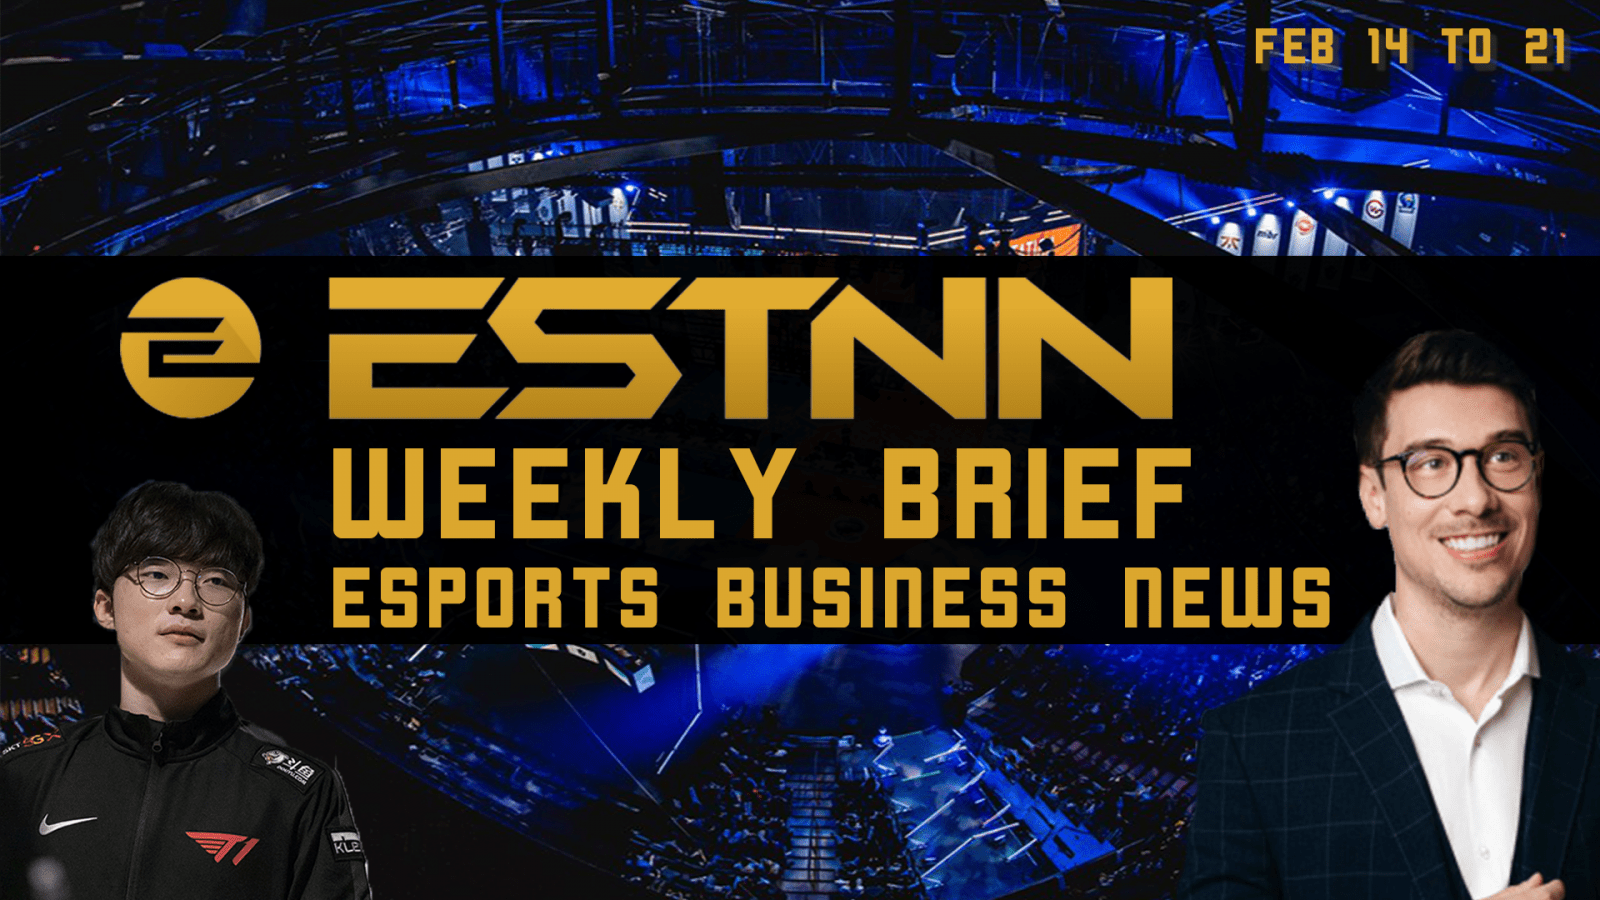 The Weekly Brief: Esports Business News Feb. 14th to 21st